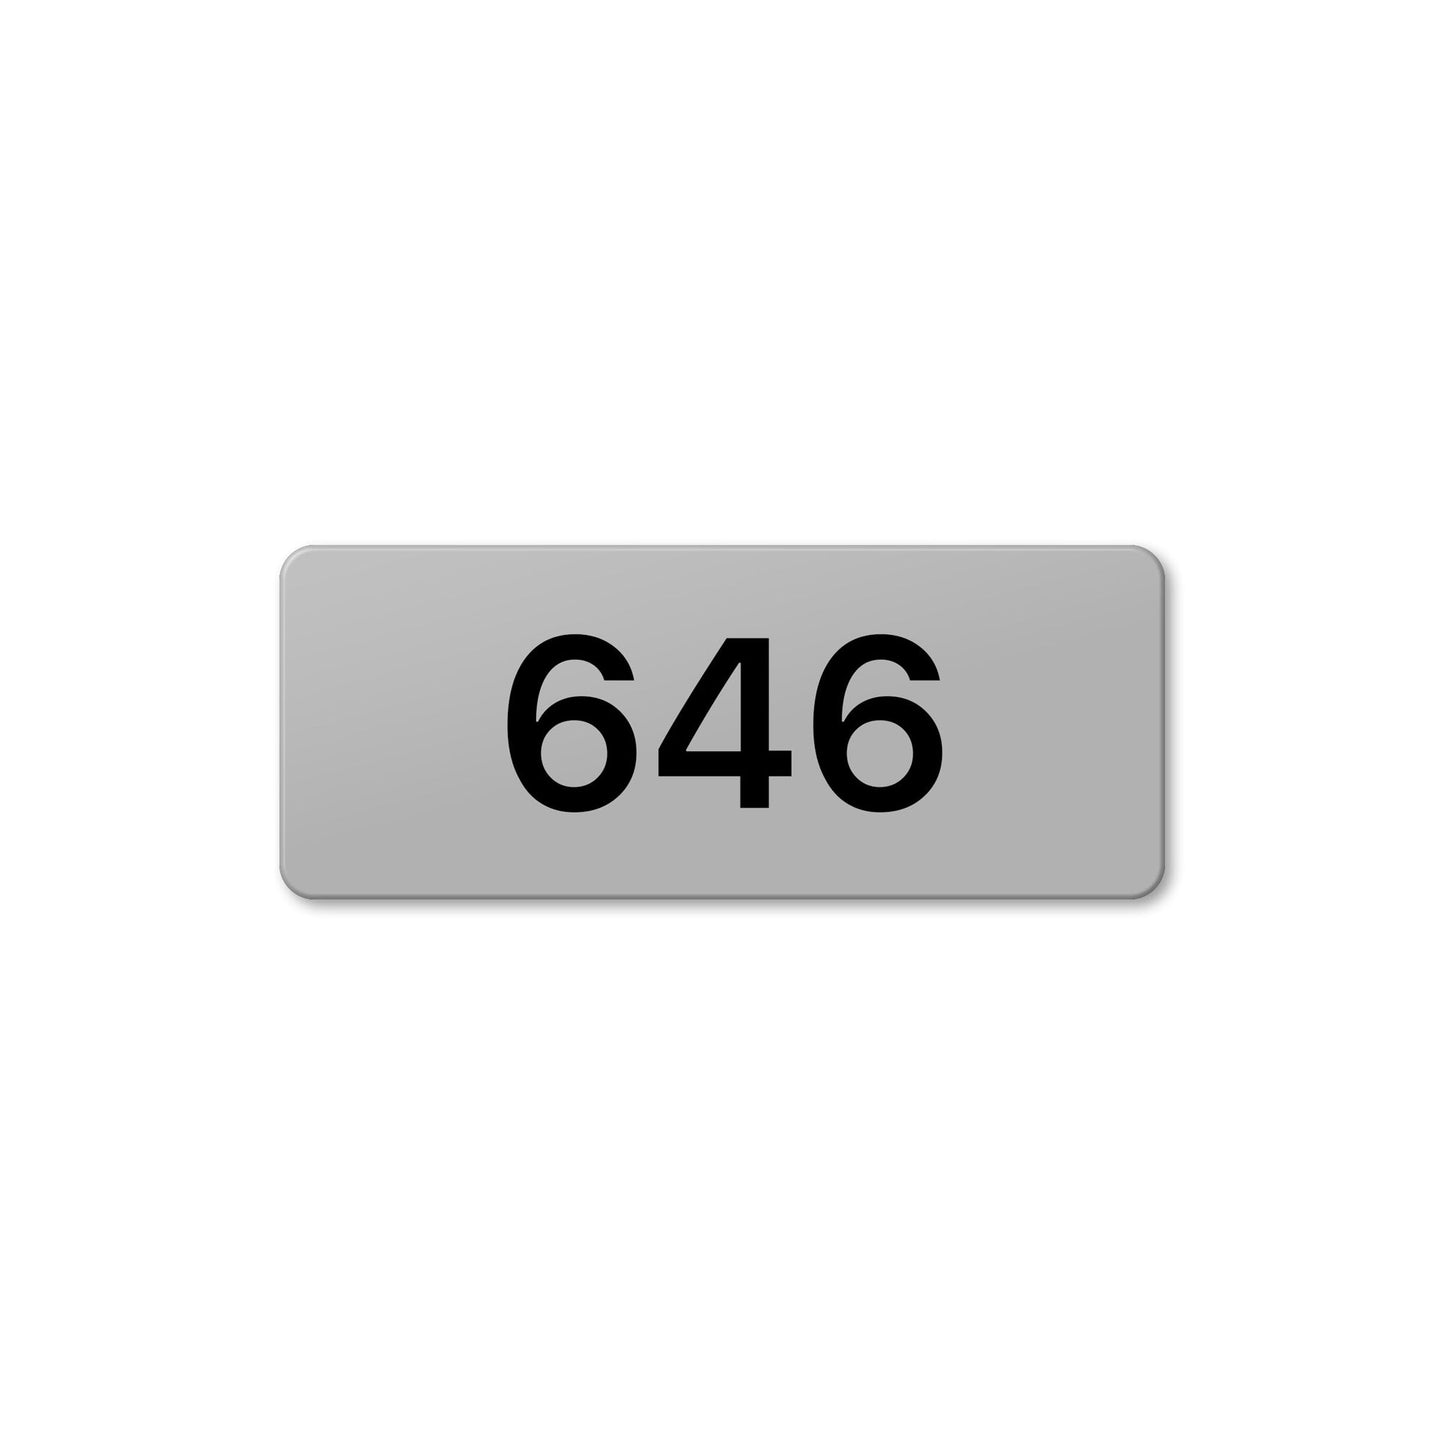 Numeral 646